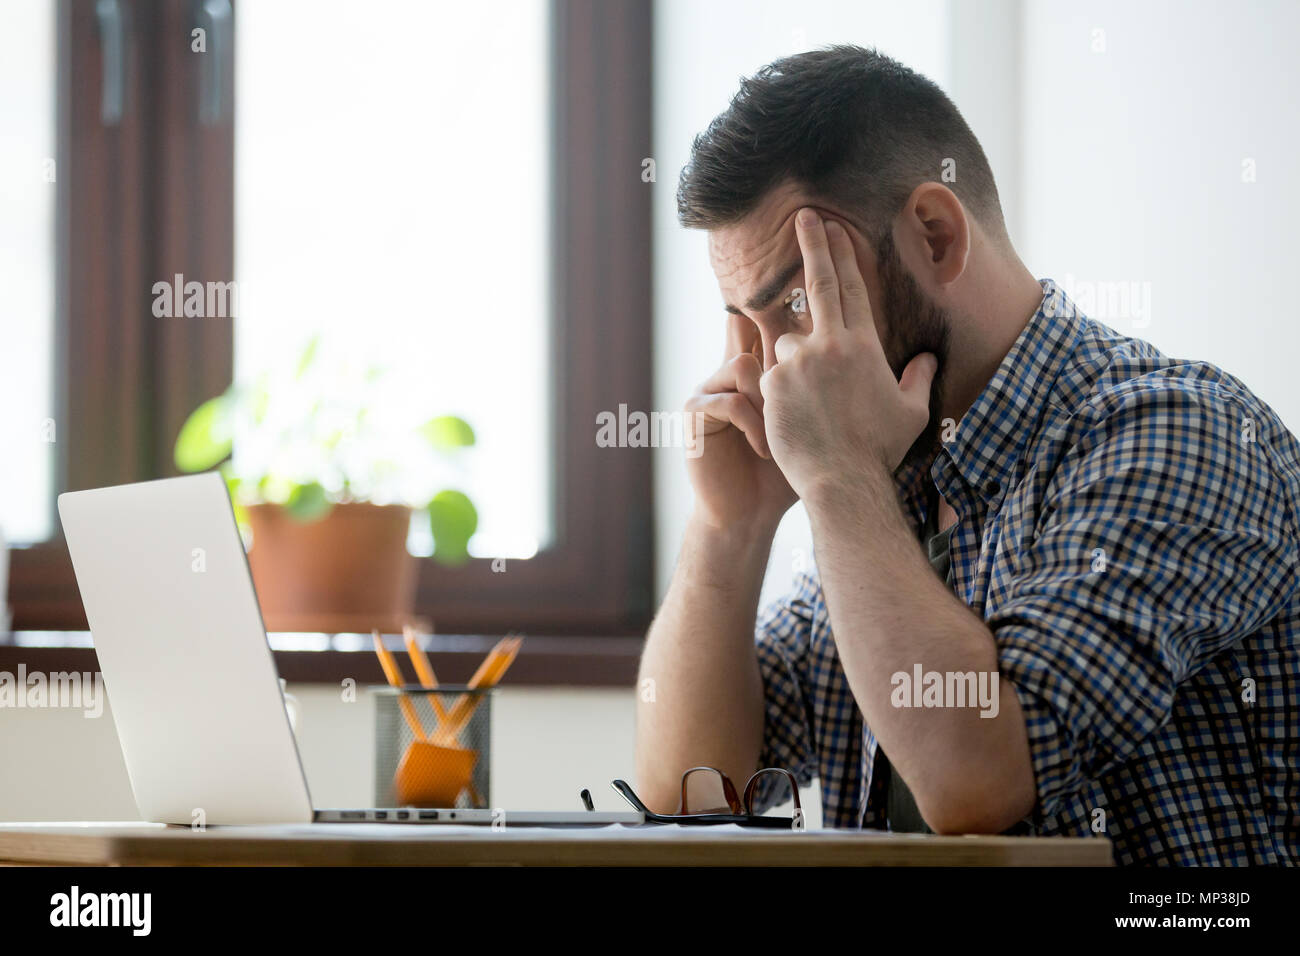 Concerned male thinking about problem solution Stock Photo